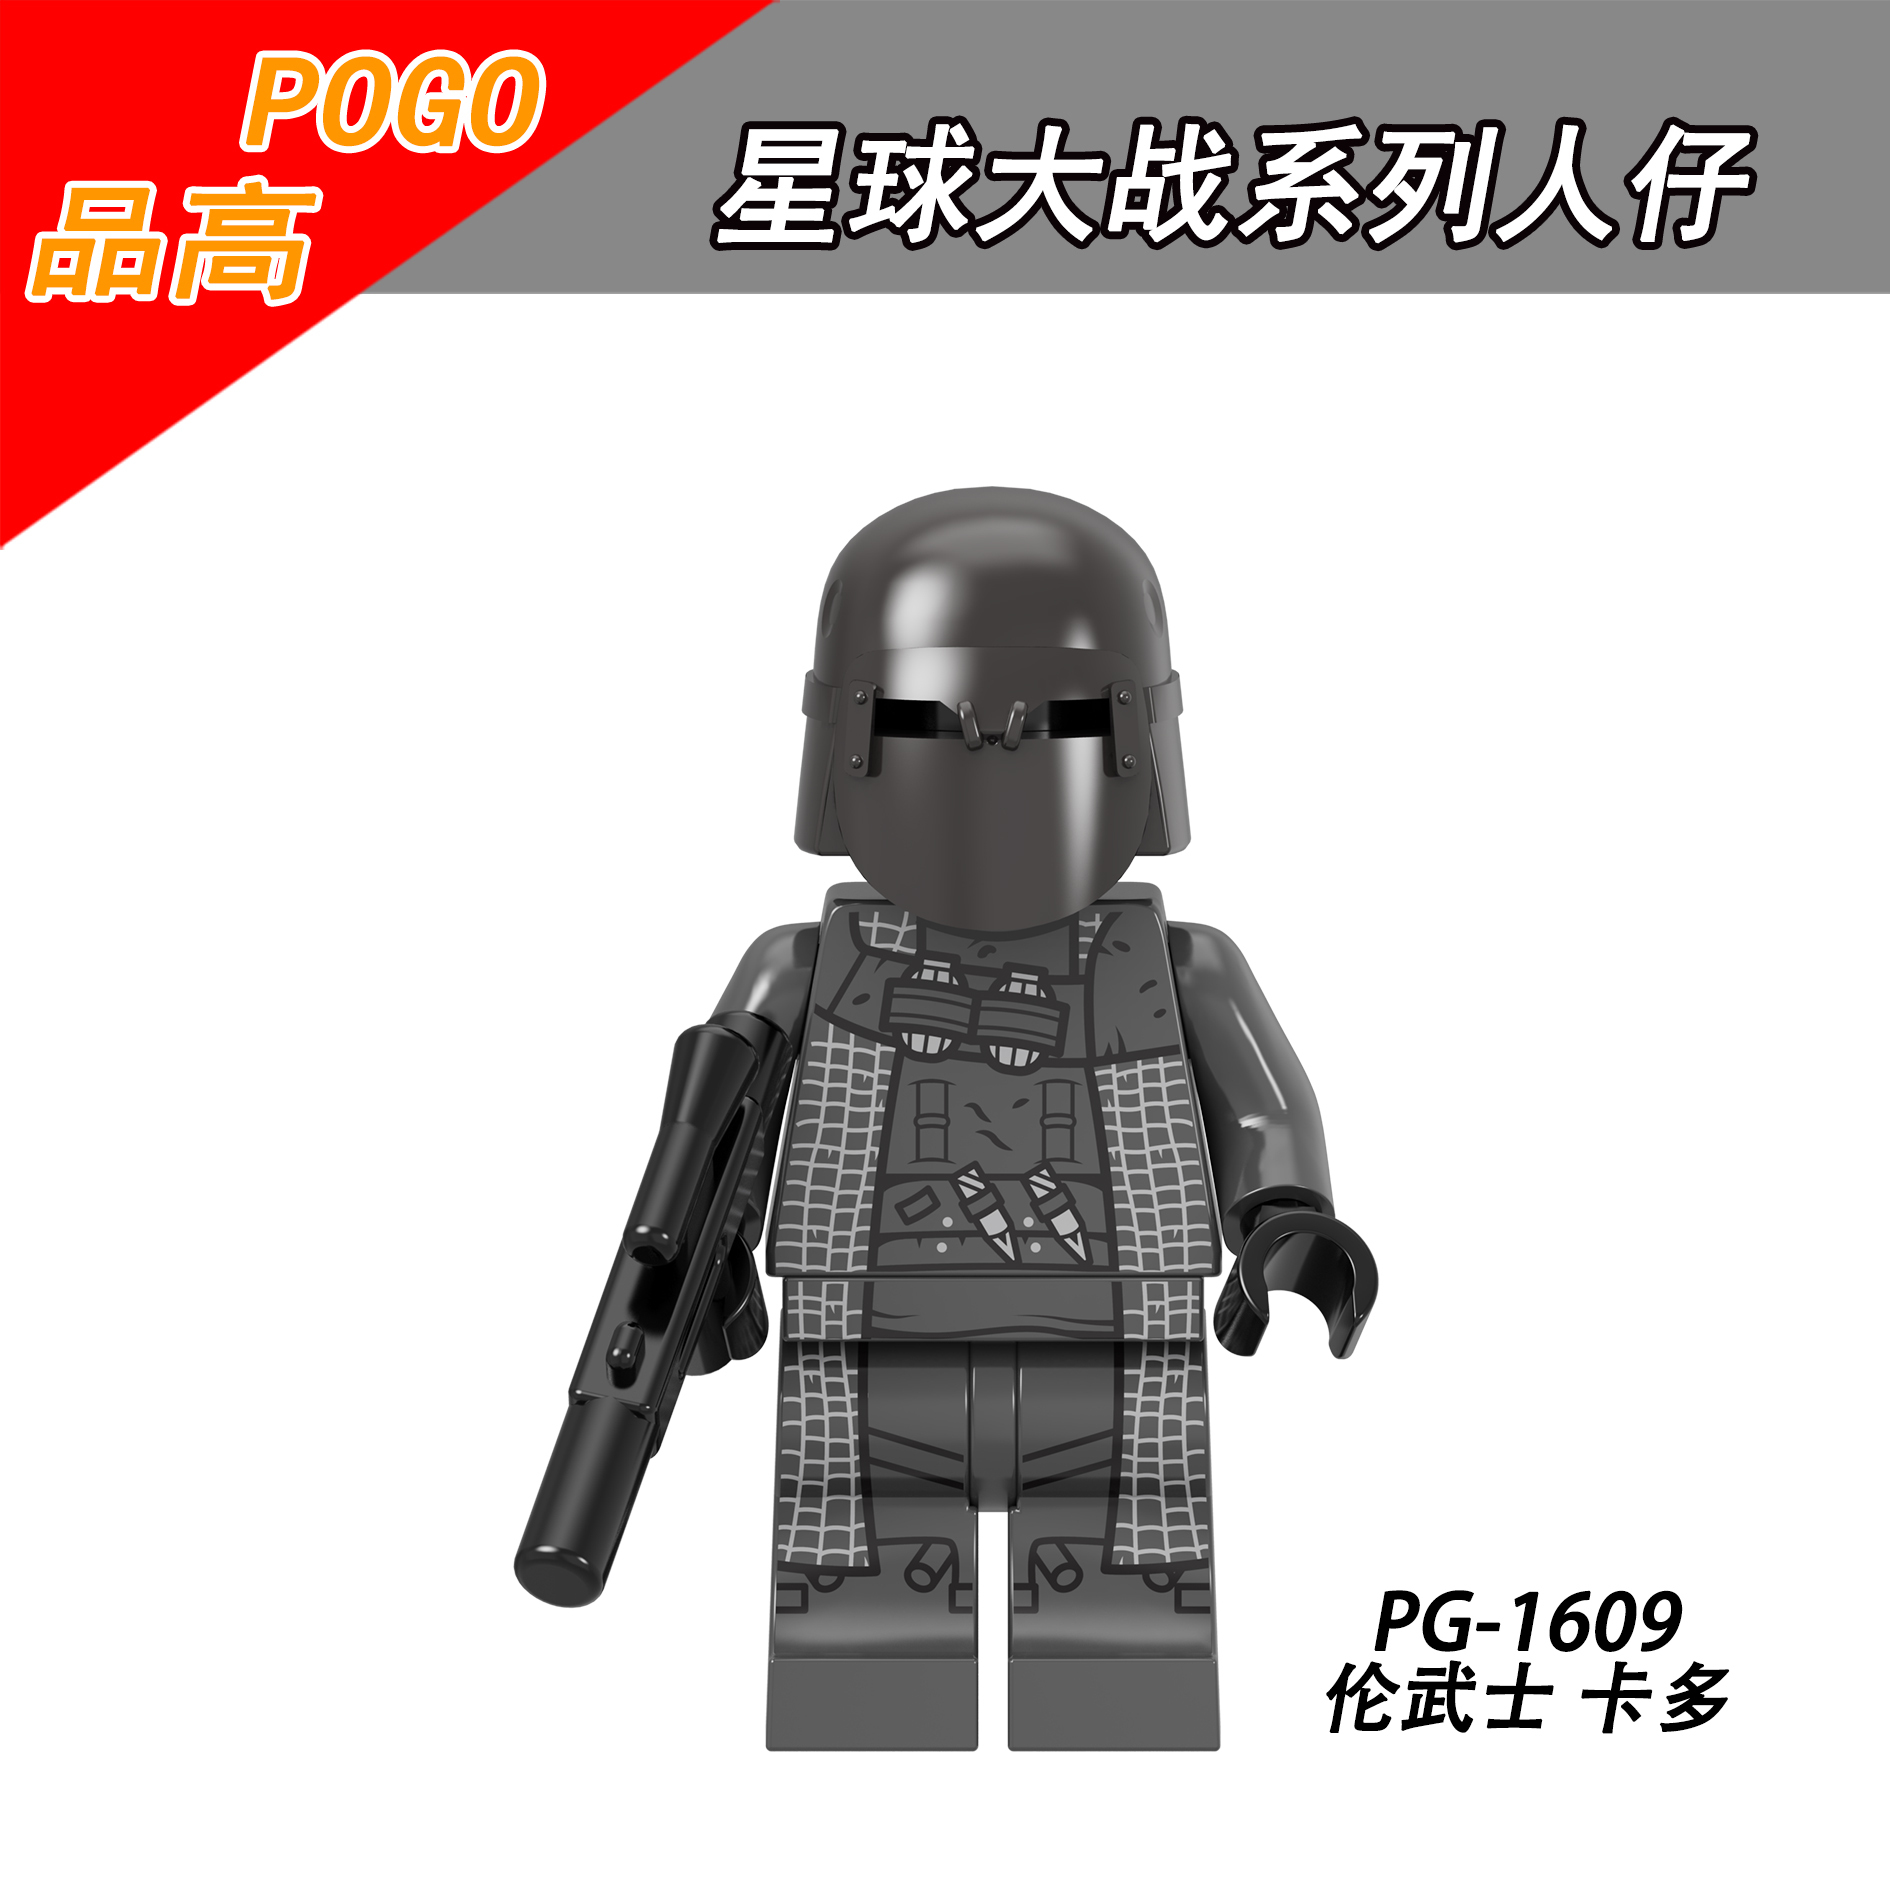 PG1605 PG1606 PG1607 PG1608 PG1609 PG1610 PG1611 PG1612 PG8296 Star Wars Clone Strooper Building Blocks Bricks Movie Series Action Educational Toys for Kids Gifts 